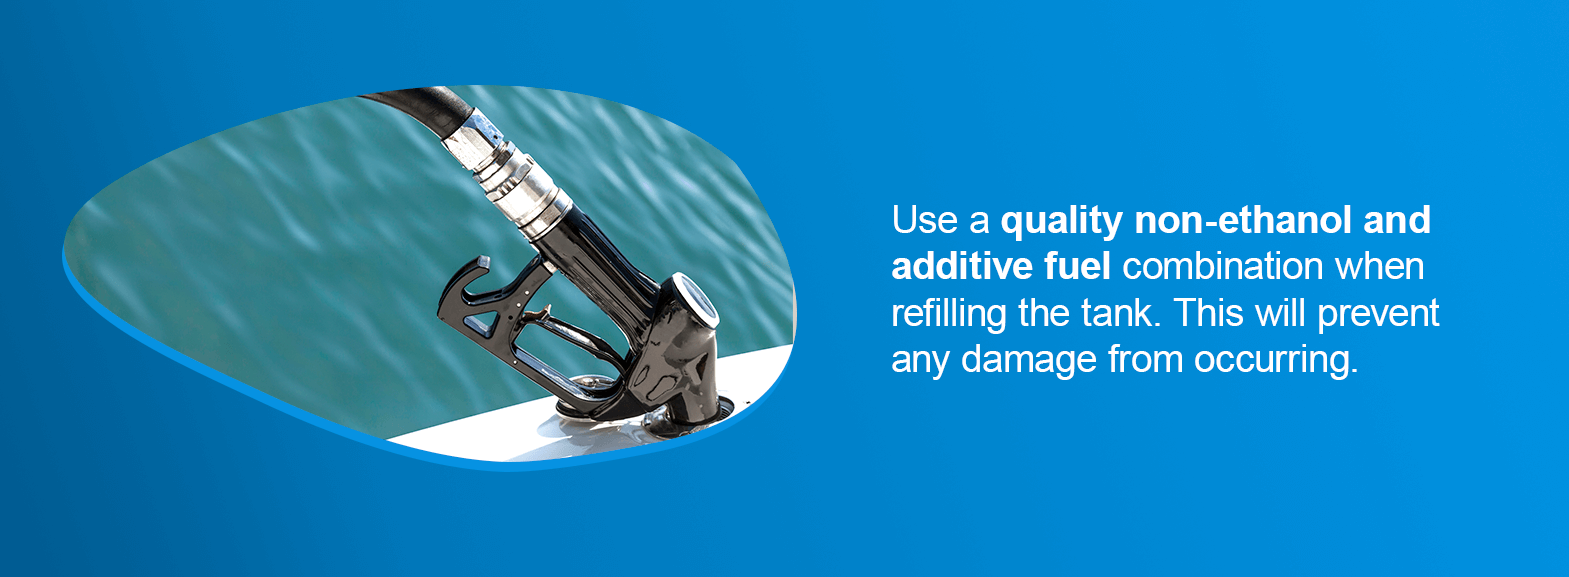 Use a quality non-ethanol and additive fuel combination when refilling the tank. This will prevent any damage from occurring.